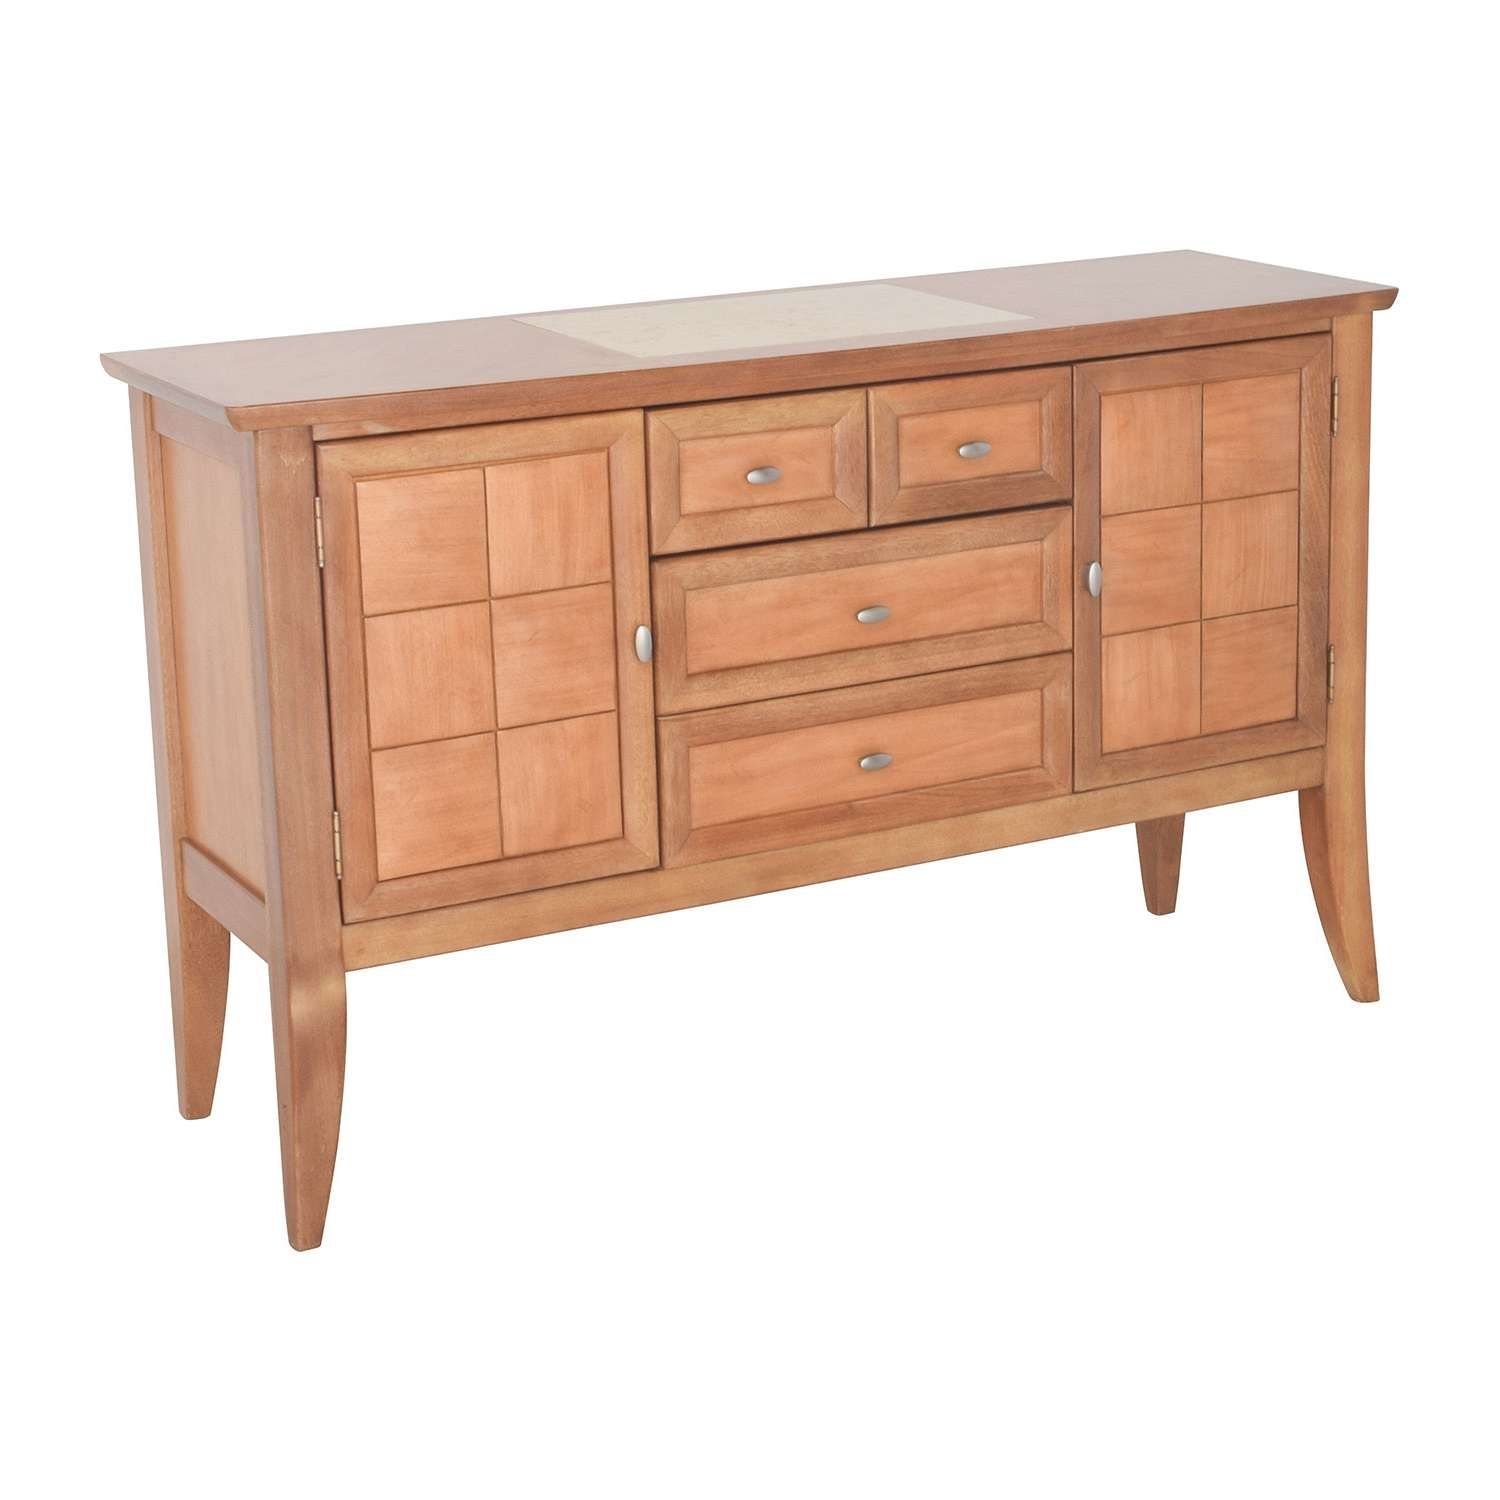 90% Off – Thomasville Thomasville Buffet Table / Storage With Regard To Second Hand Dressers And Sideboards (View 10 of 20)